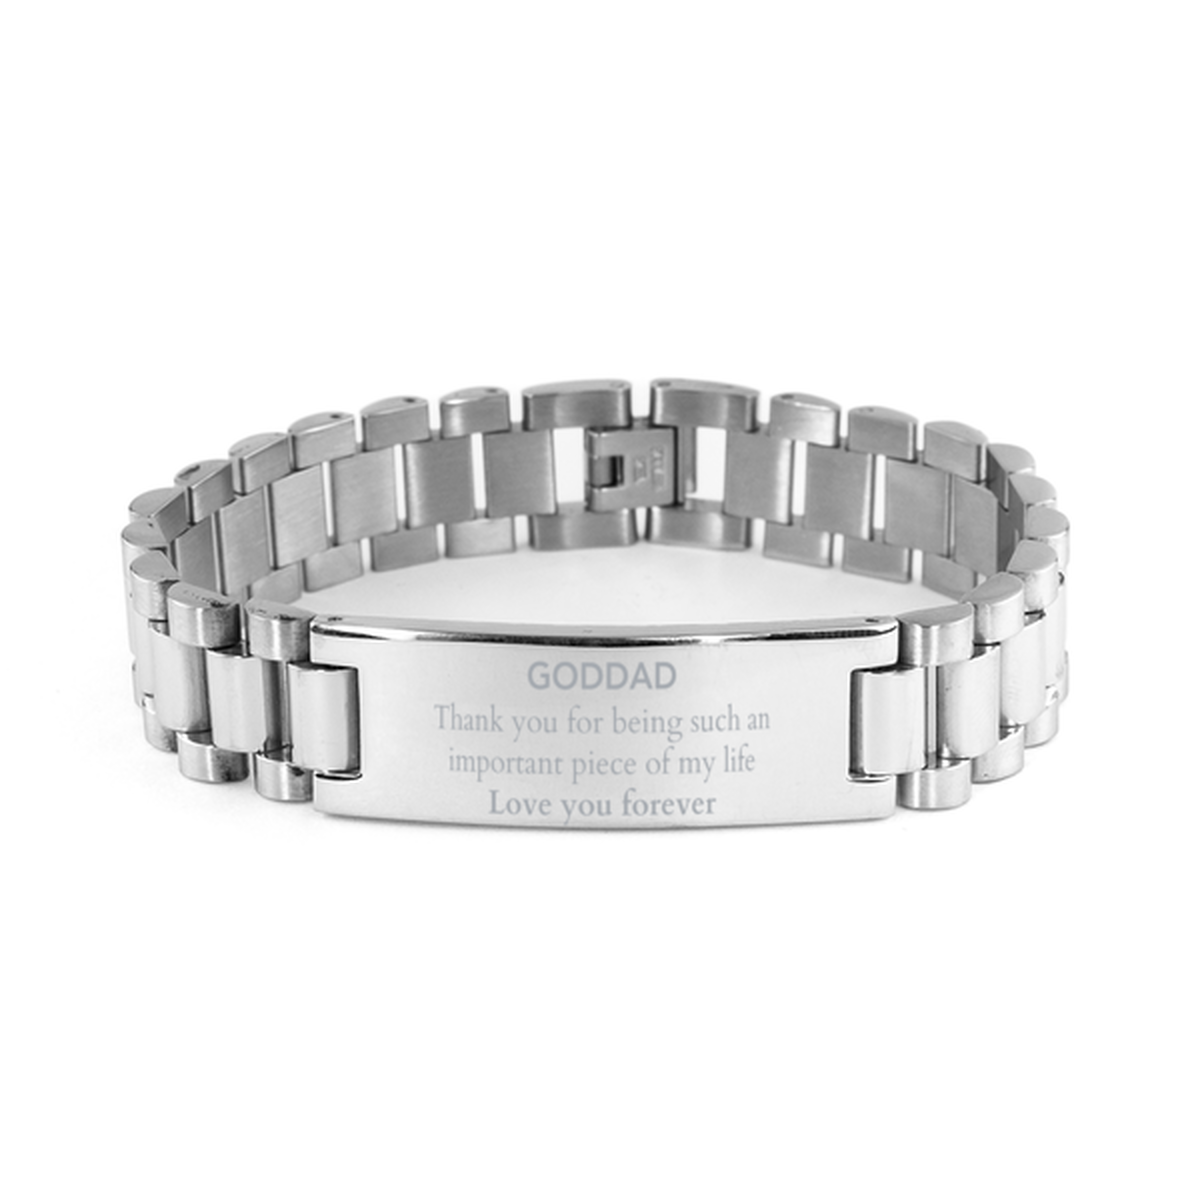 Appropriate Goddad Ladder Stainless Steel Bracelet Epic Birthday Gifts for Goddad Thank you for being such an important piece of my life Goddad Christmas Mothers Fathers Day